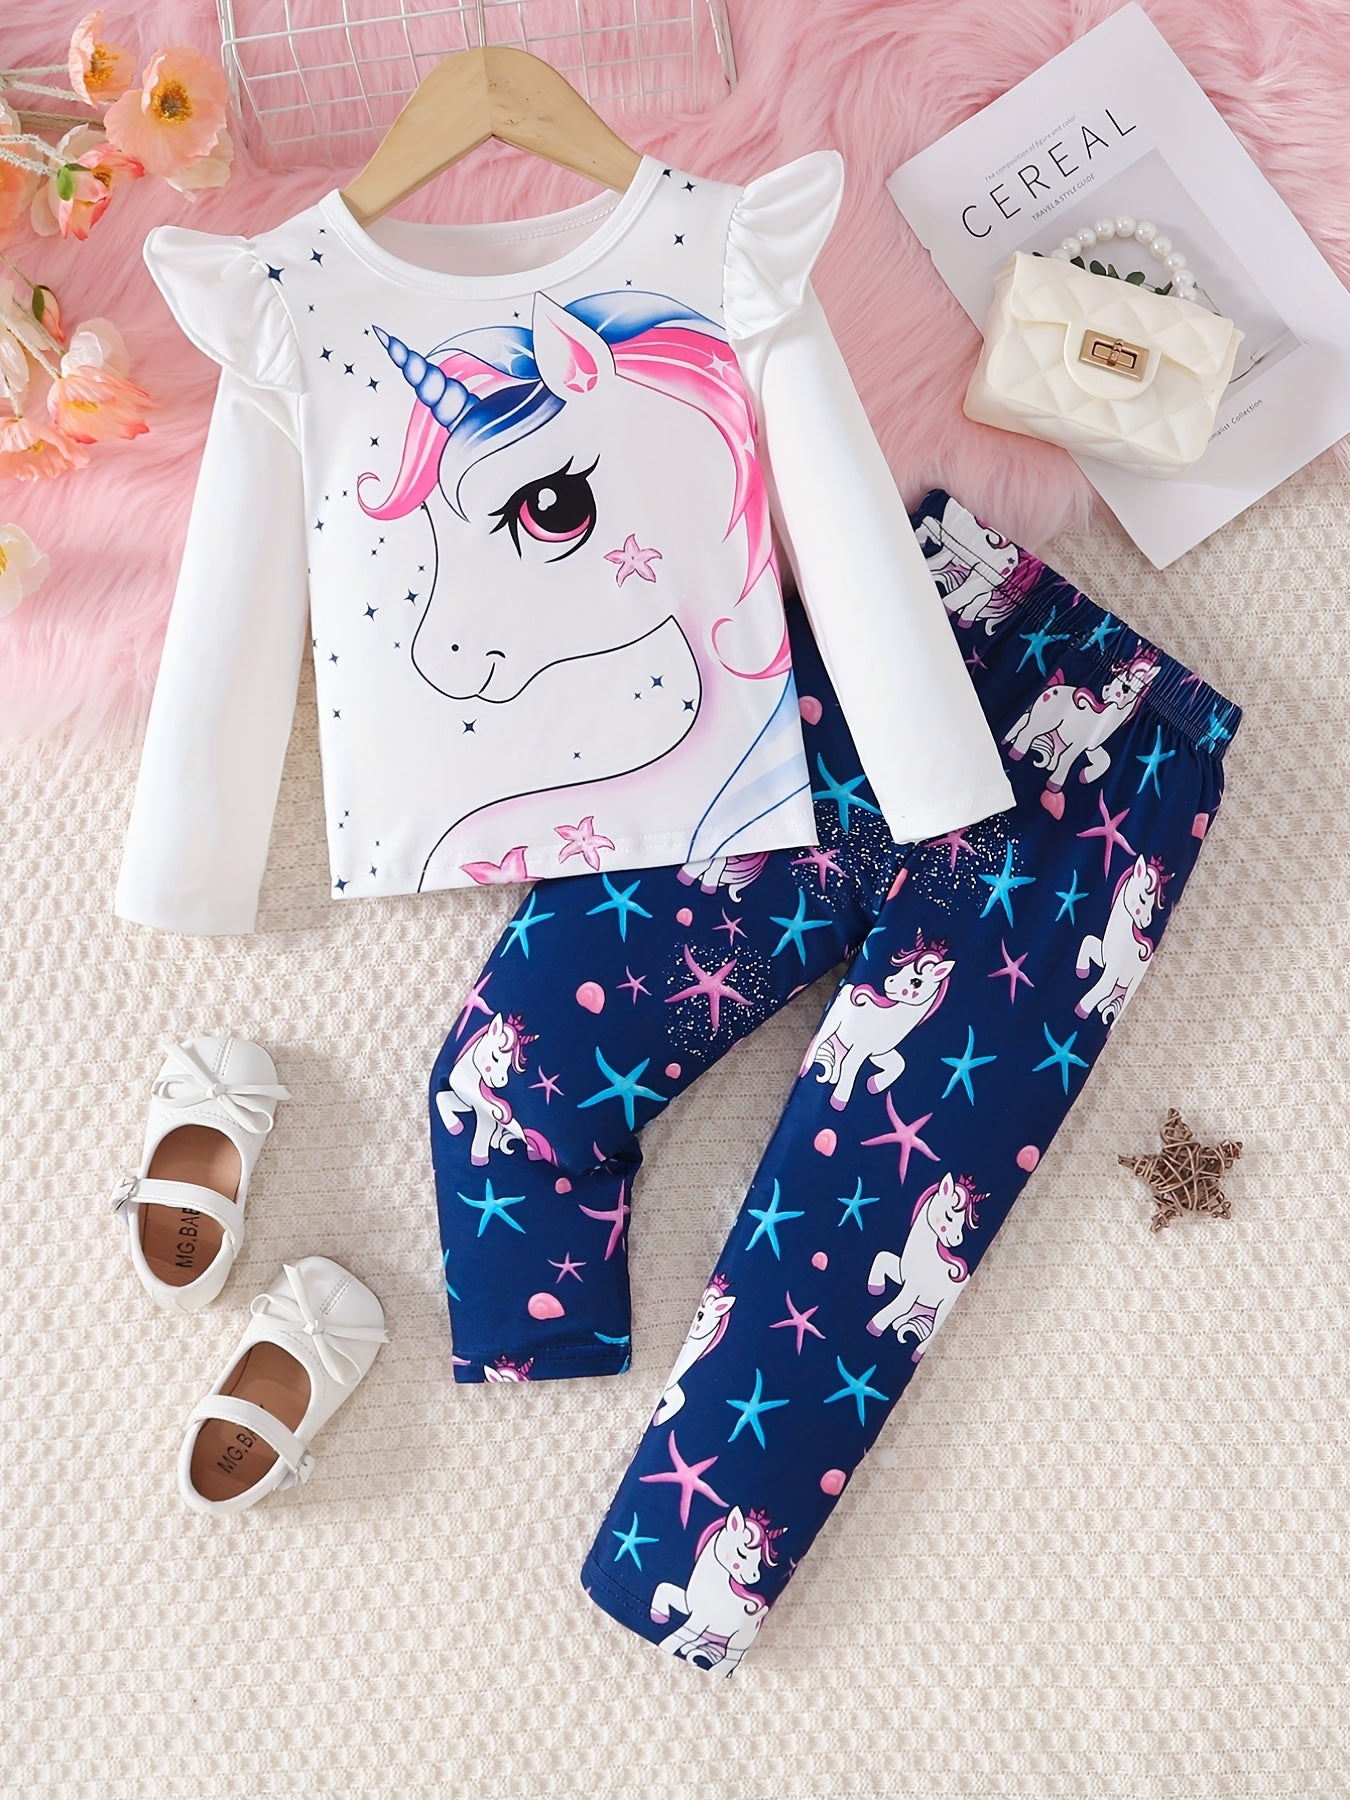 Toddler Girl's 2pcs, Long Sleeve Top & Pants Set, Unicorn Starfish Print Ruffle Decor Casual Outfits, Kids Clothes For Spring Fall